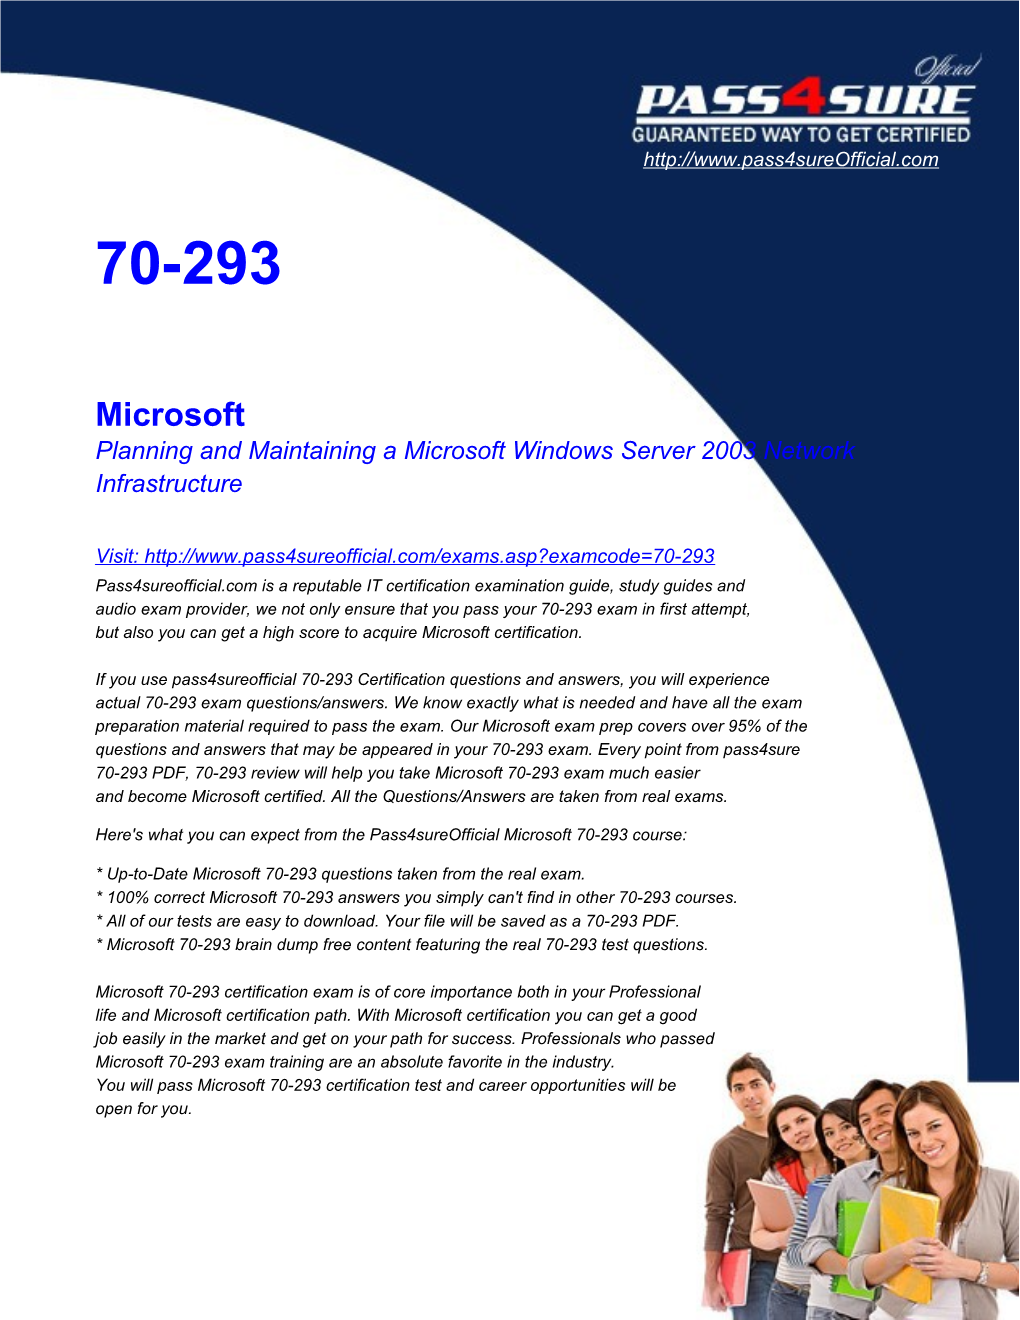 Planning and Maintaining a Microsoft Windows Server 2003 Network